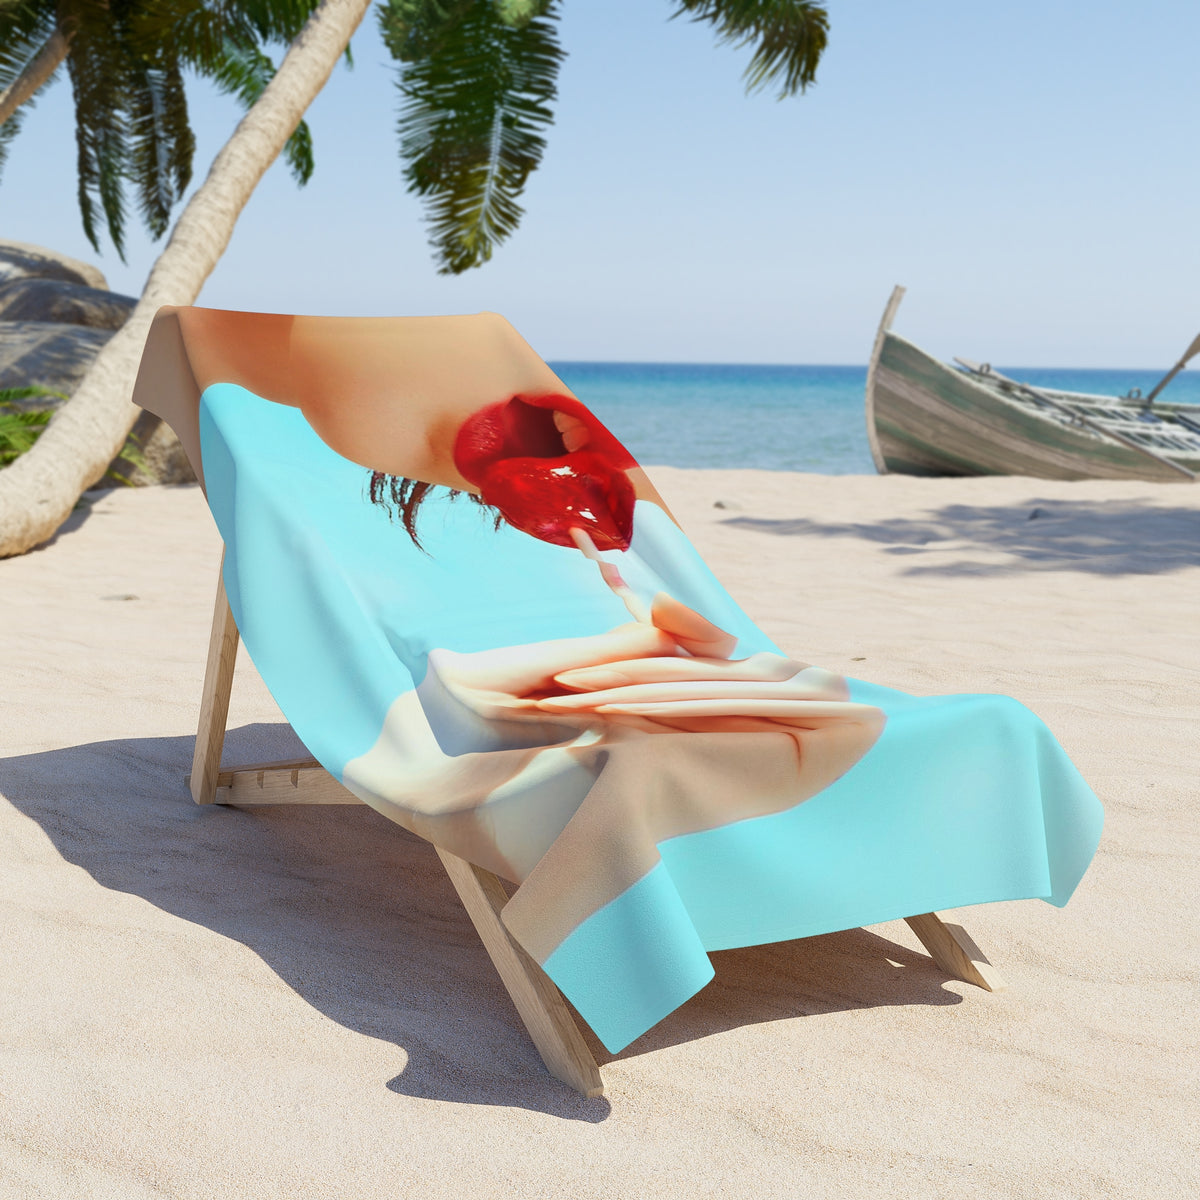 view of a beach with a beach chair with a towel overtop of a girl holding a red lollipop up to her red lips